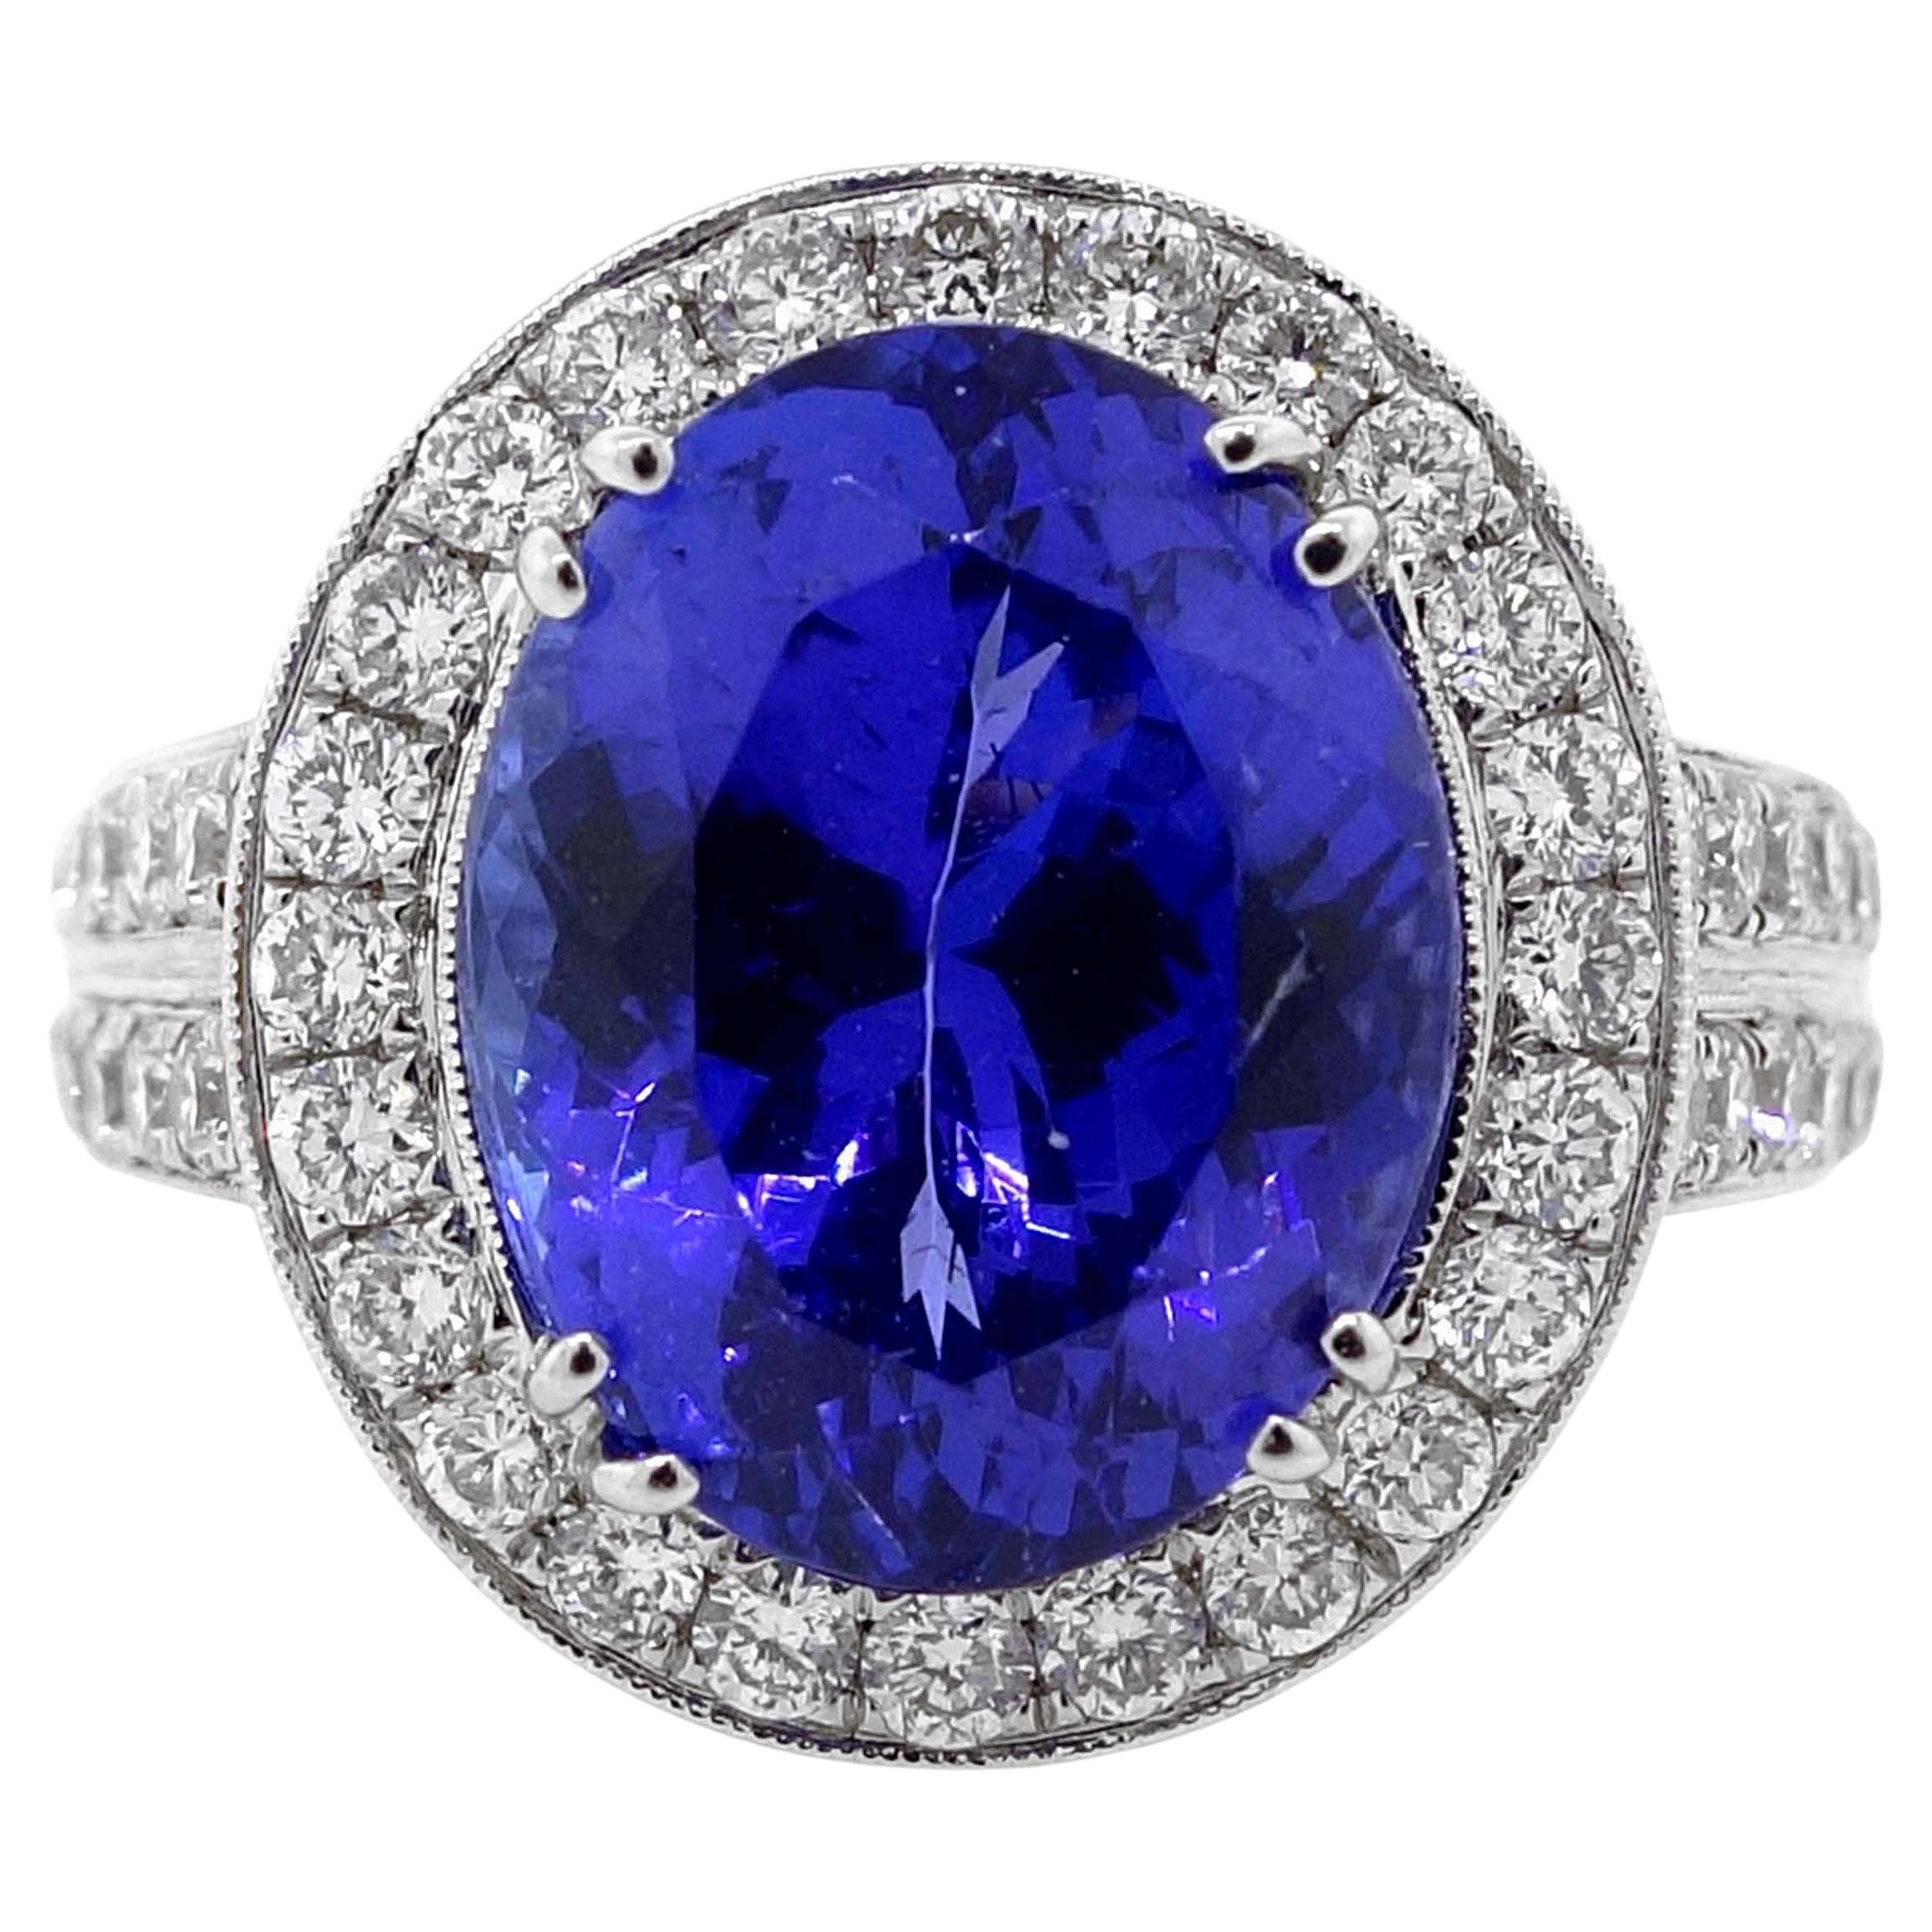 5.65 Carat Oval Tanzanite Ring in 18k White Gold For Sale